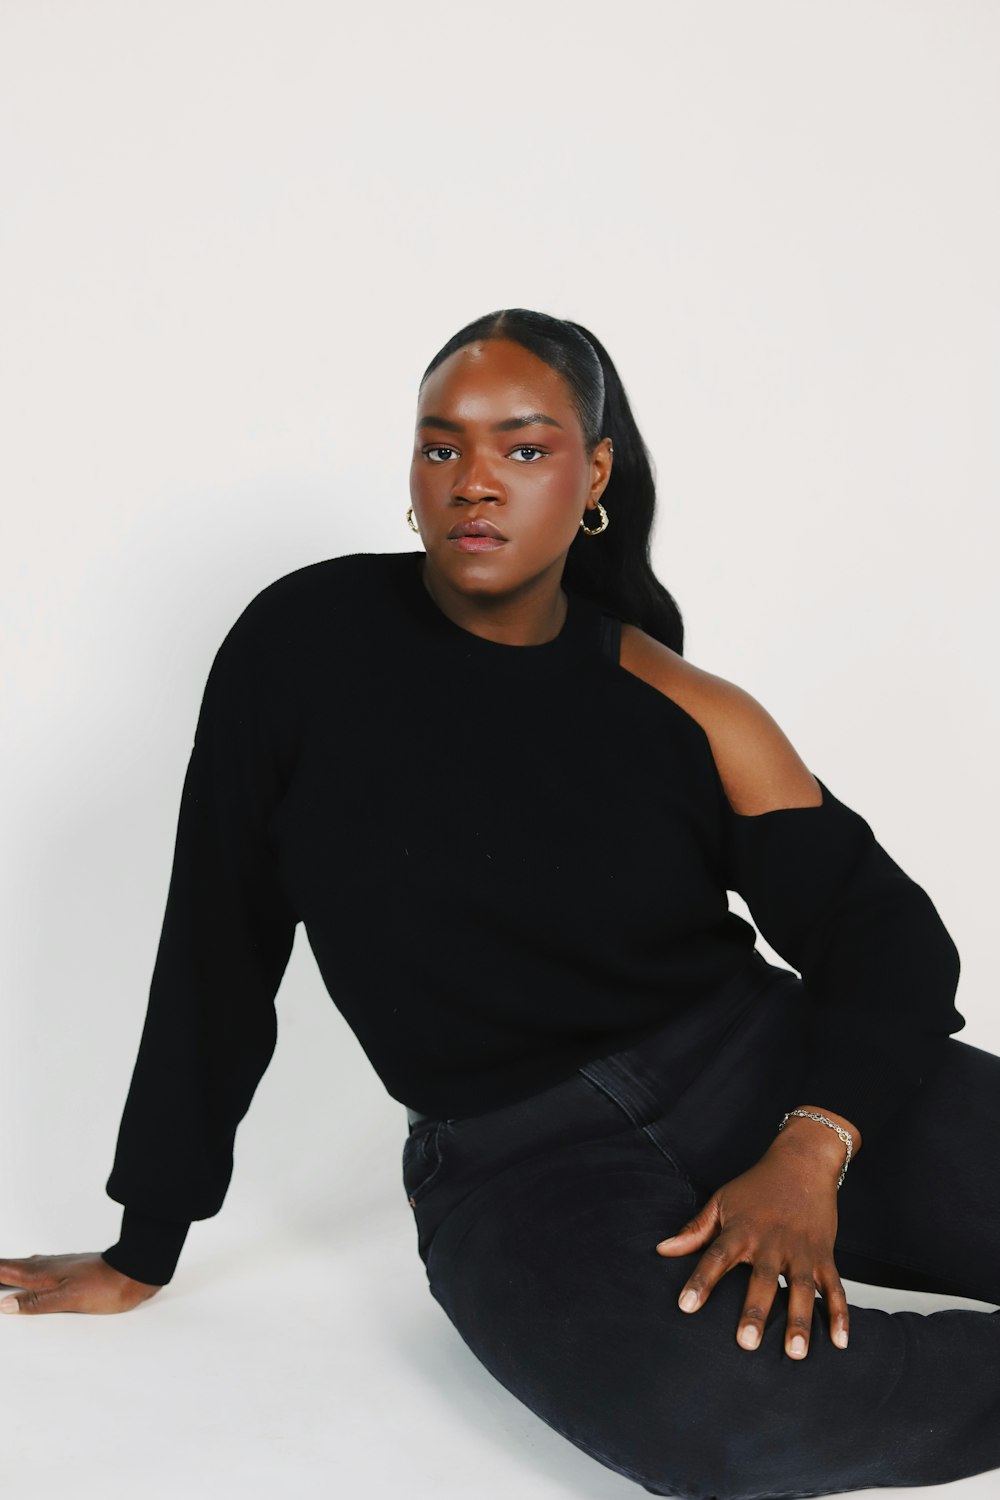 a woman sitting on the ground wearing a black sweater and jeans